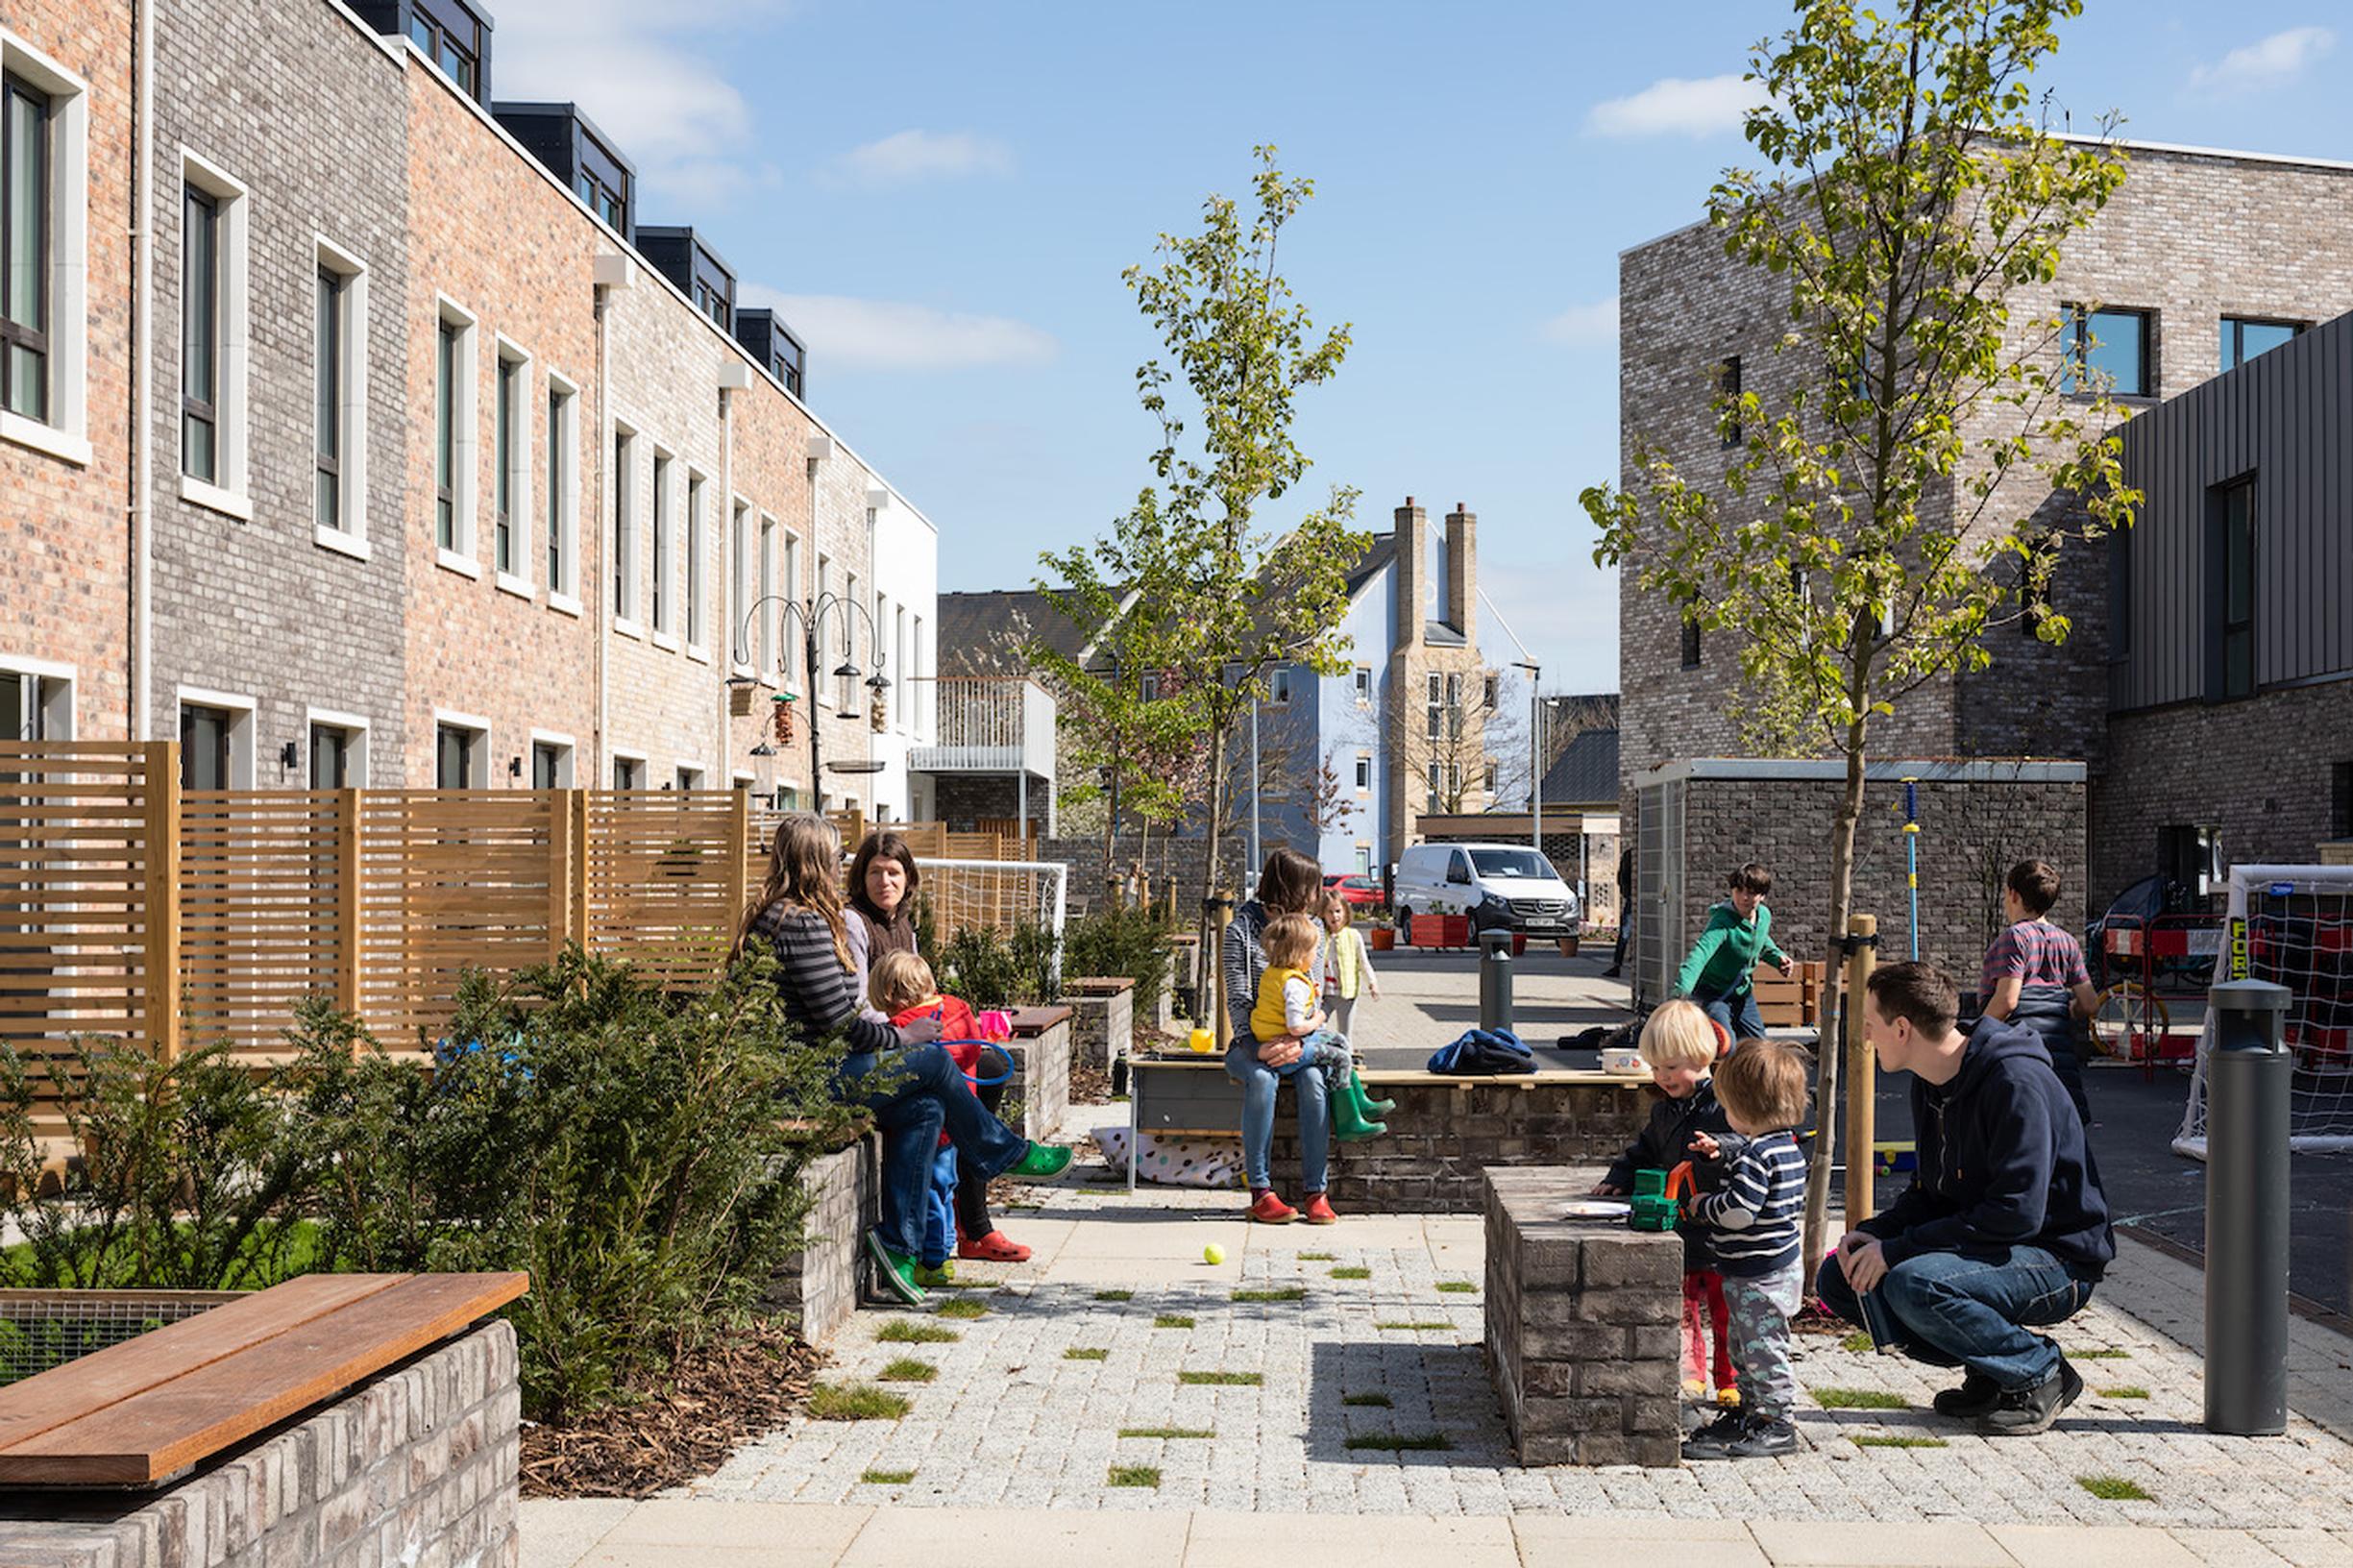 Marmalade Lane in Cambridge, where car space makes way for better houses and larger communal space. PIC: David Butler